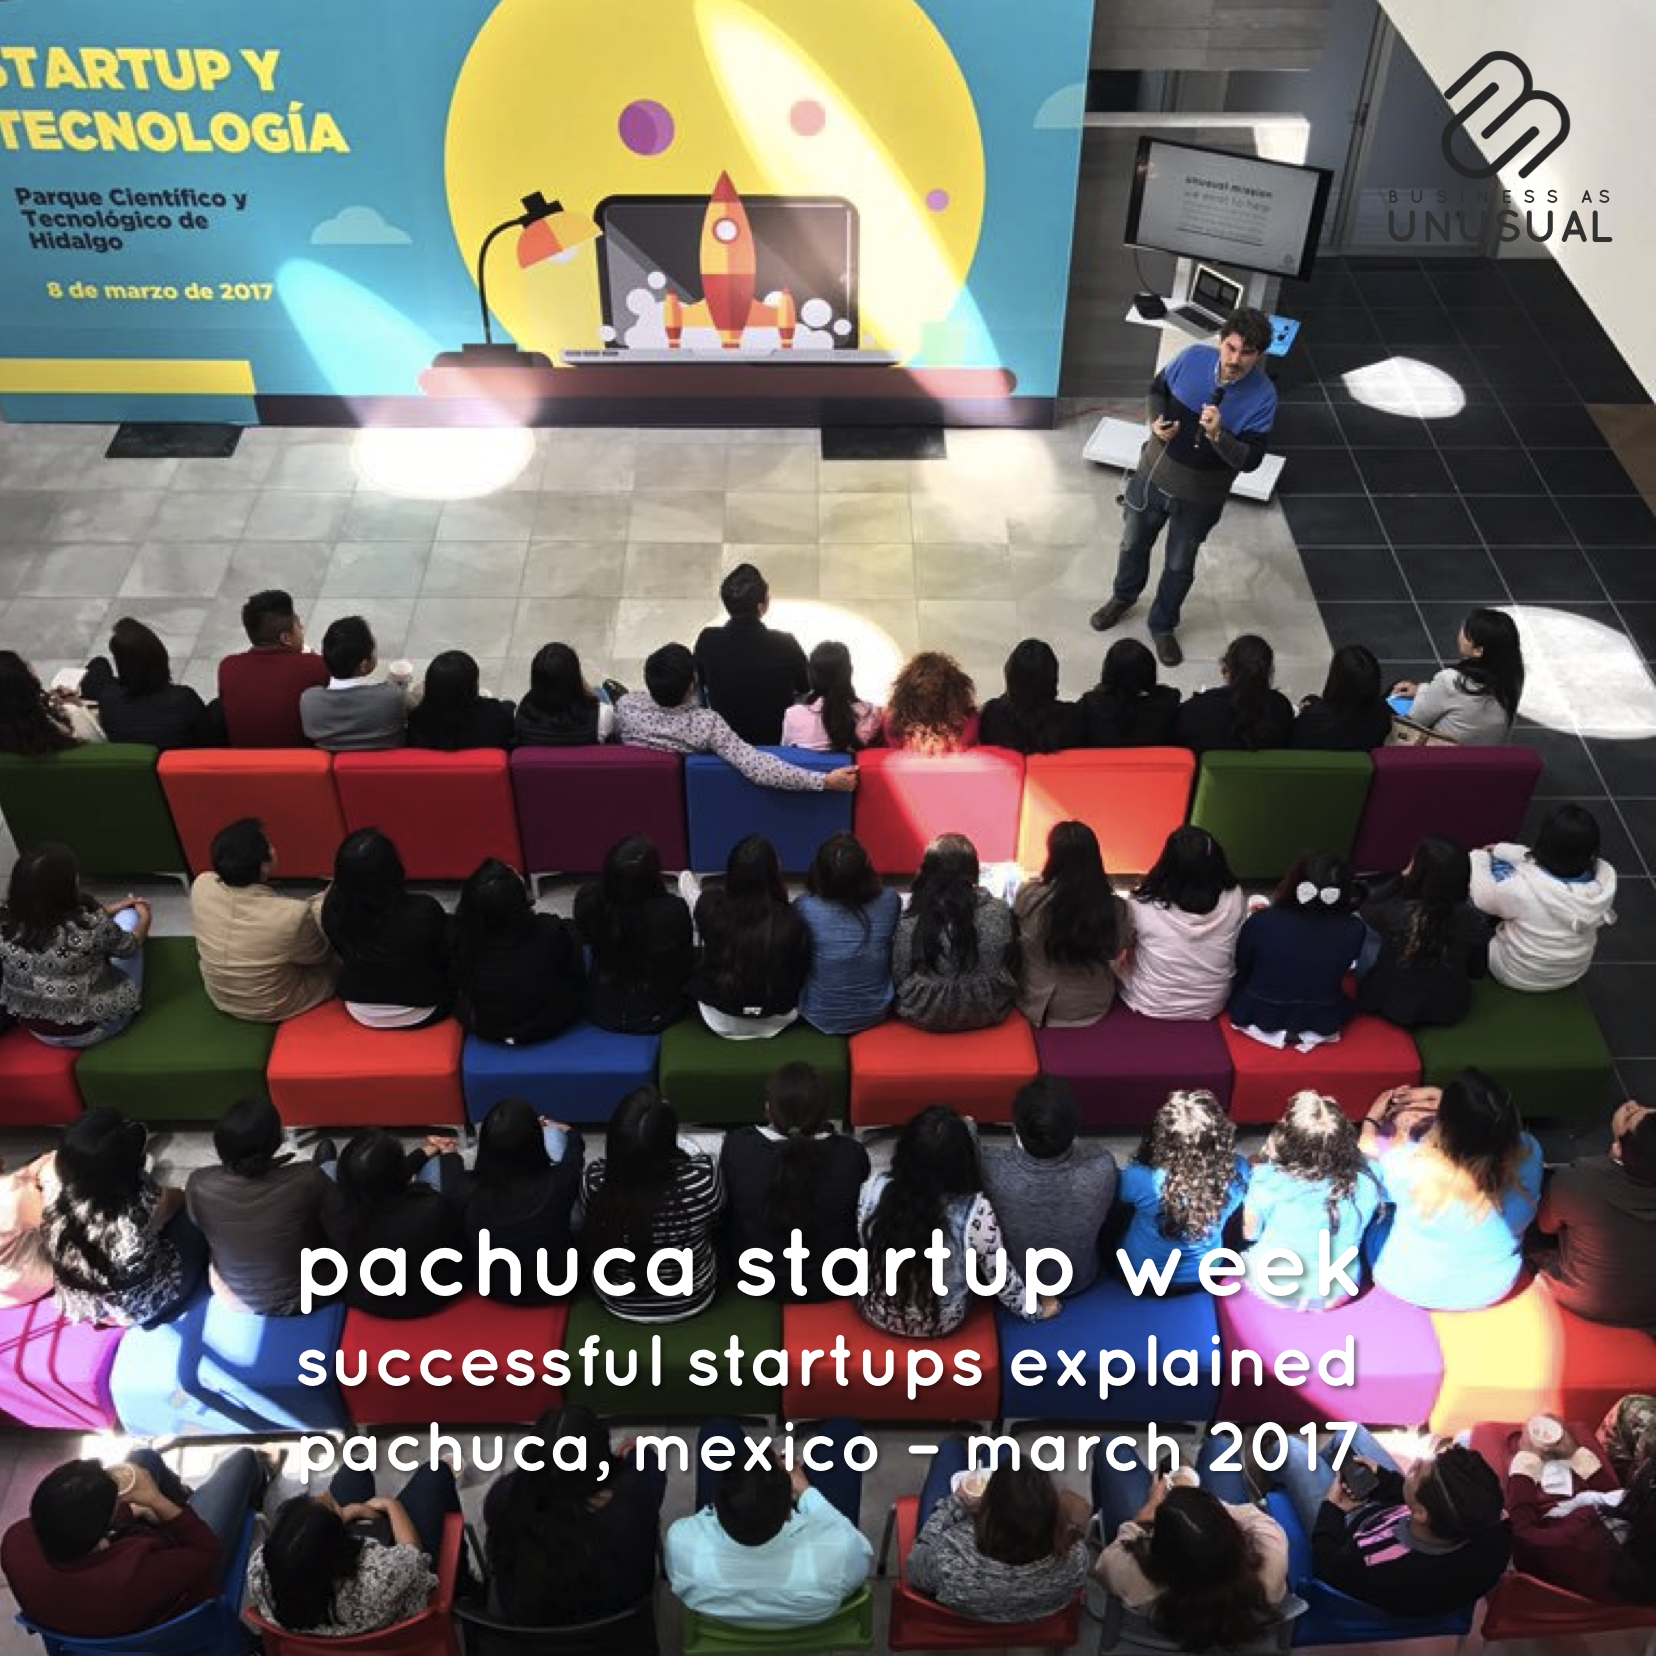 Pachuca Startup Week - Successful Startups Explained - Pachuca - March 2017